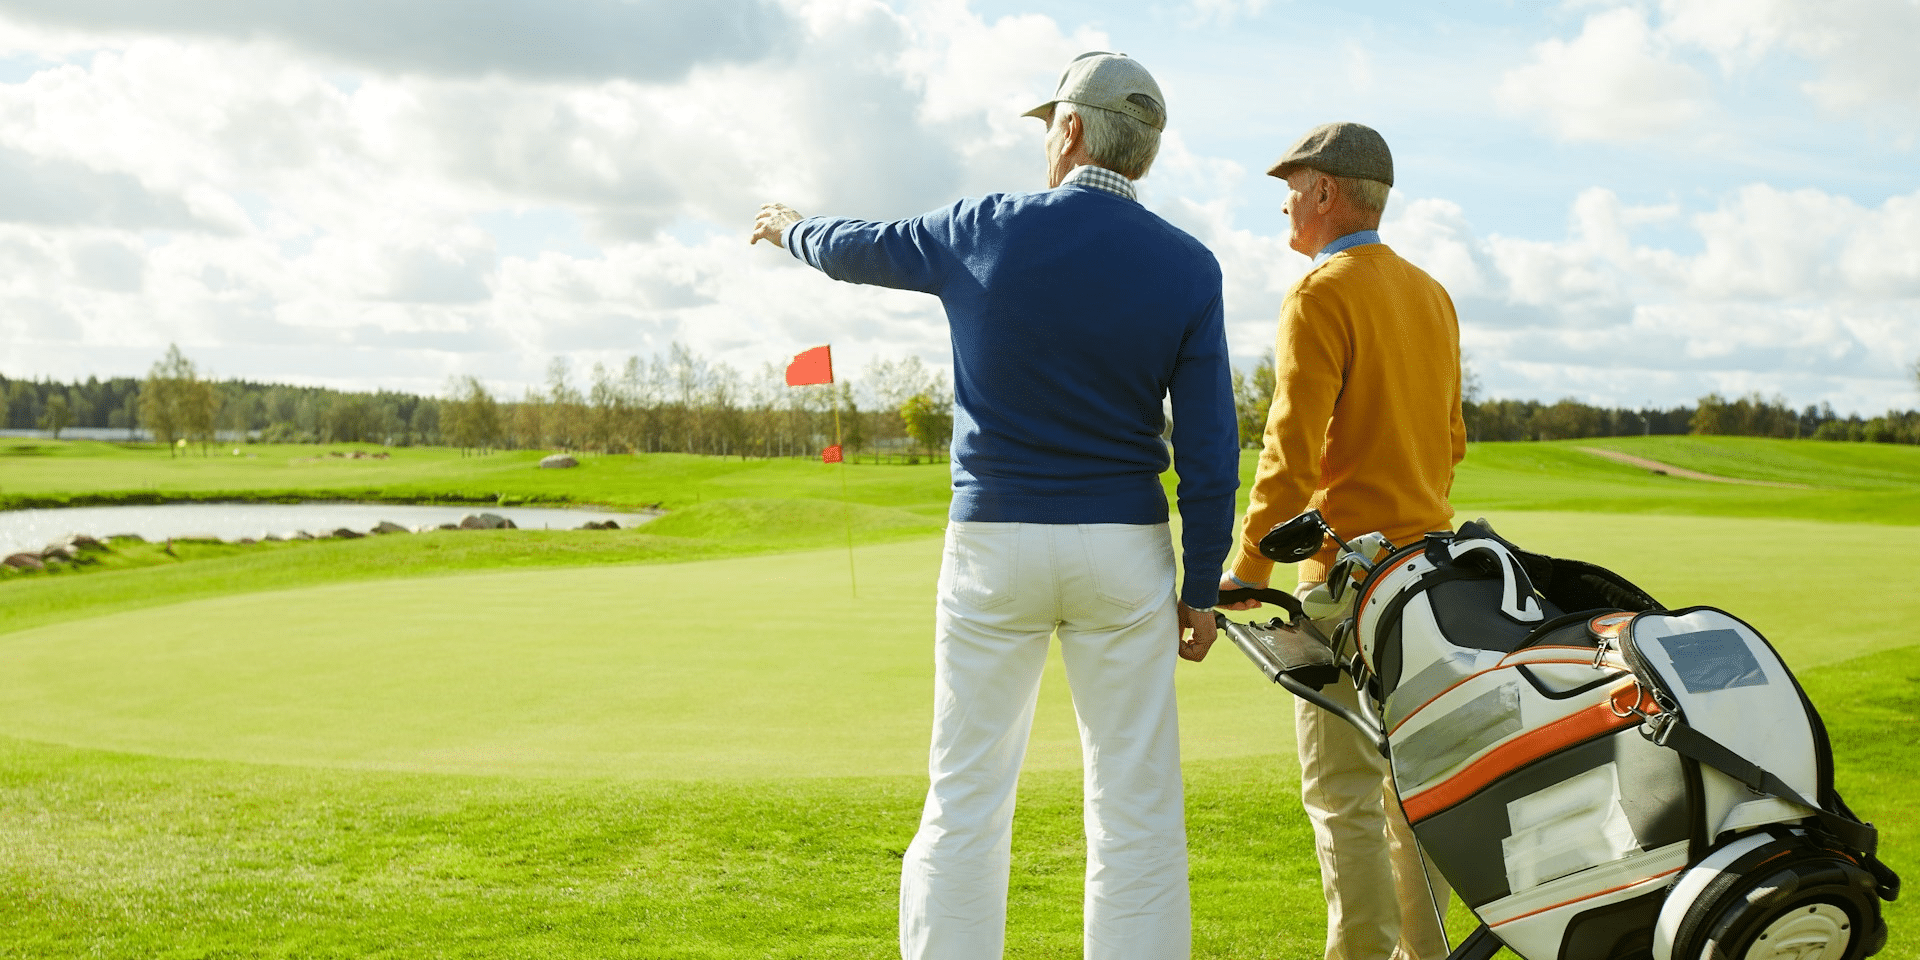 Sports for Men Over 50: Get a Work Out While Having Fun